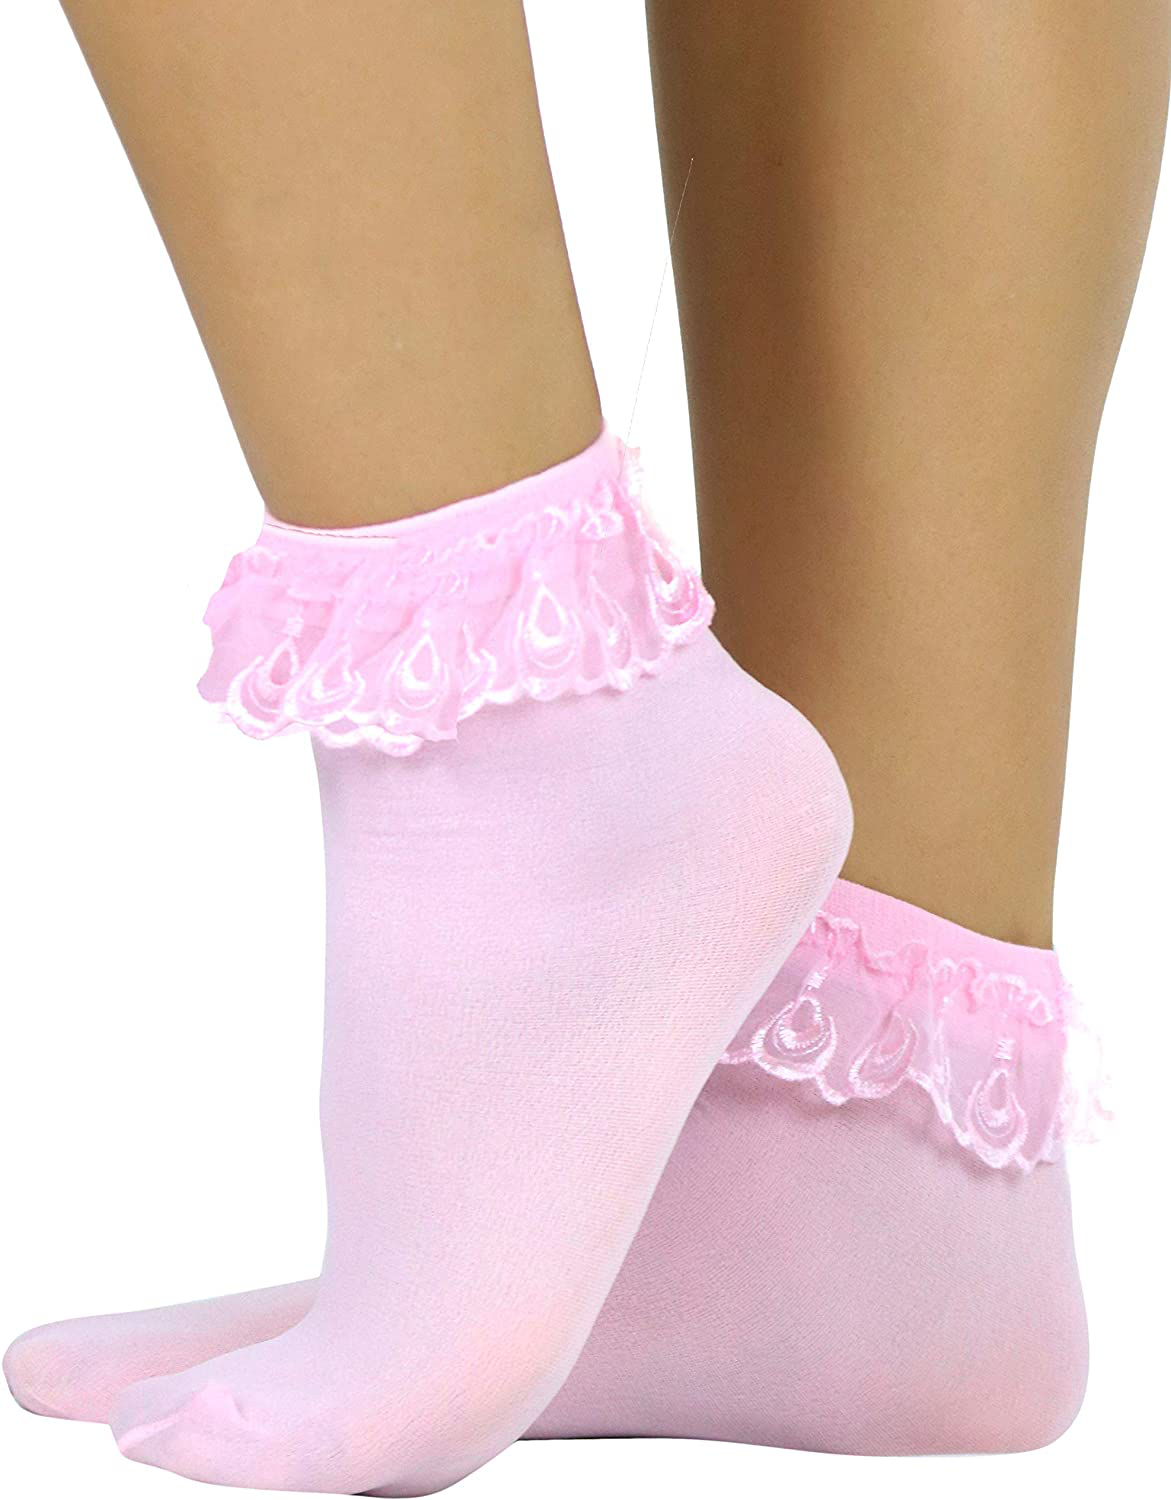 White Ruffled Anklet Socks - Frilly White Opaque Lace Ruffles Top